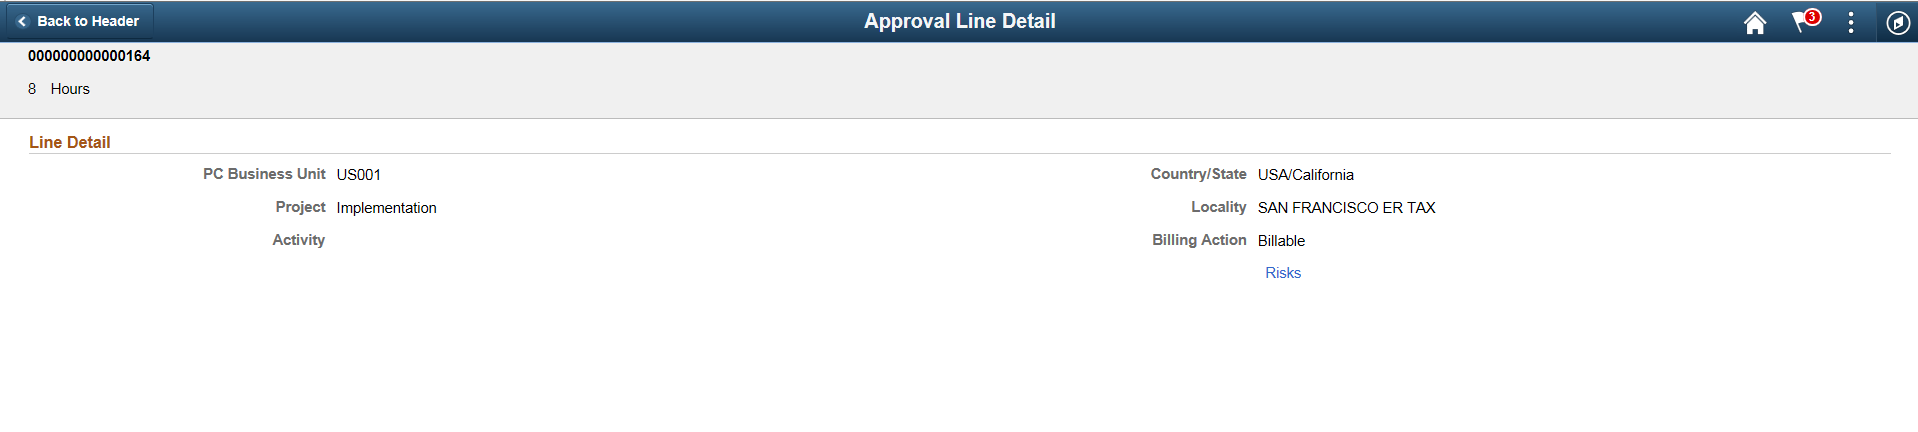 Pending Approvals - Time Report Page (Line Detail)